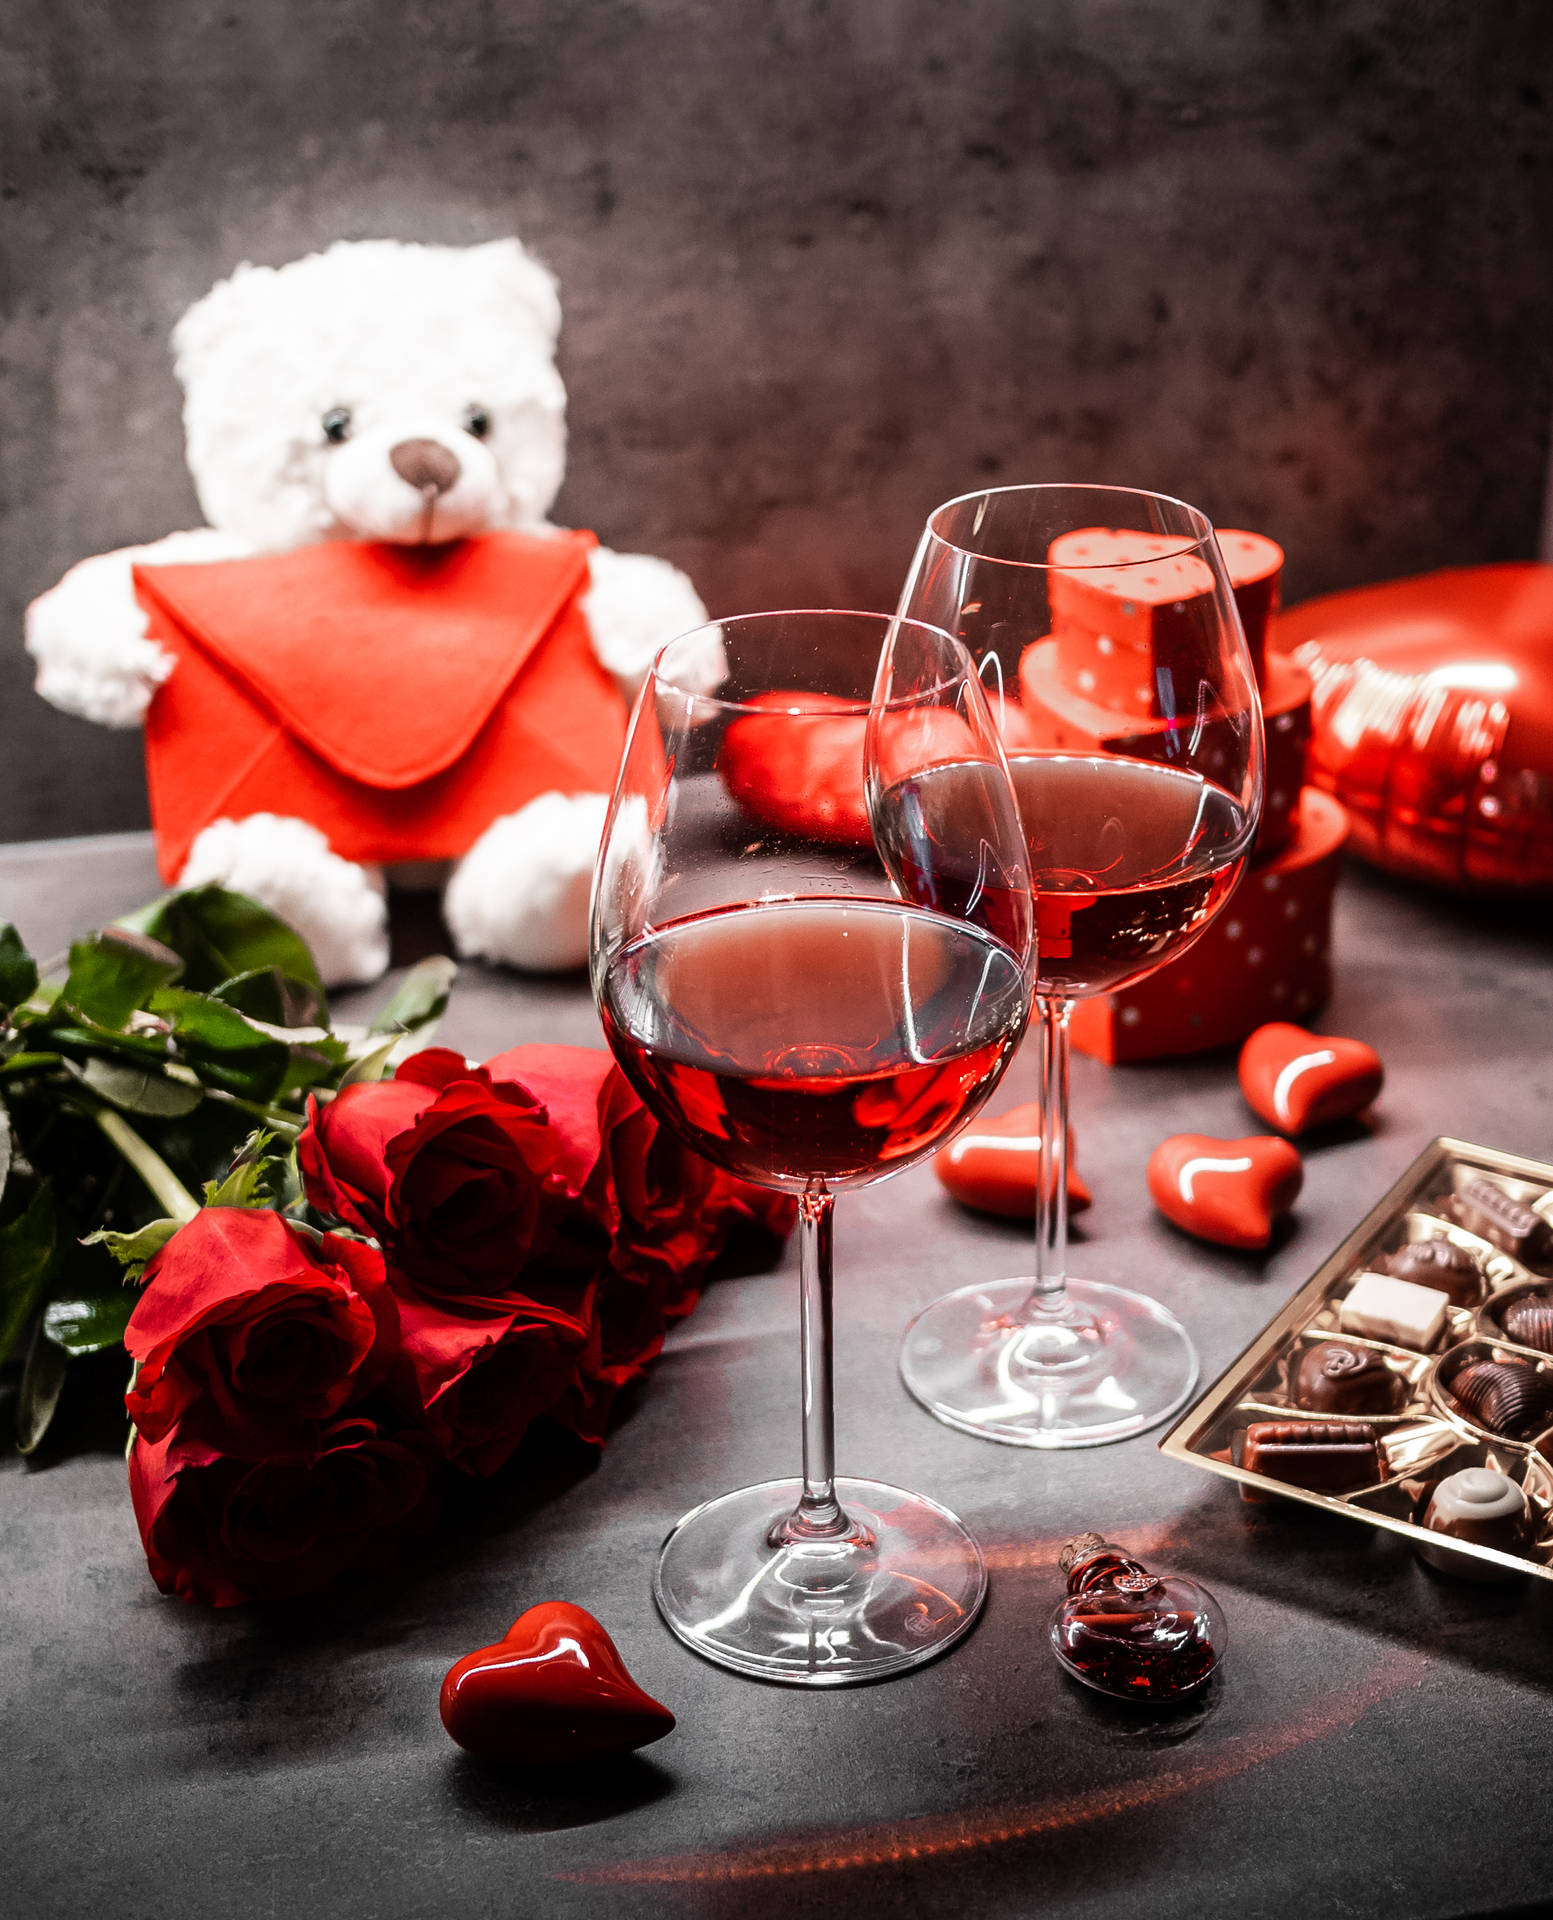 Romantic Love Flowers Red Roses And Wine Background